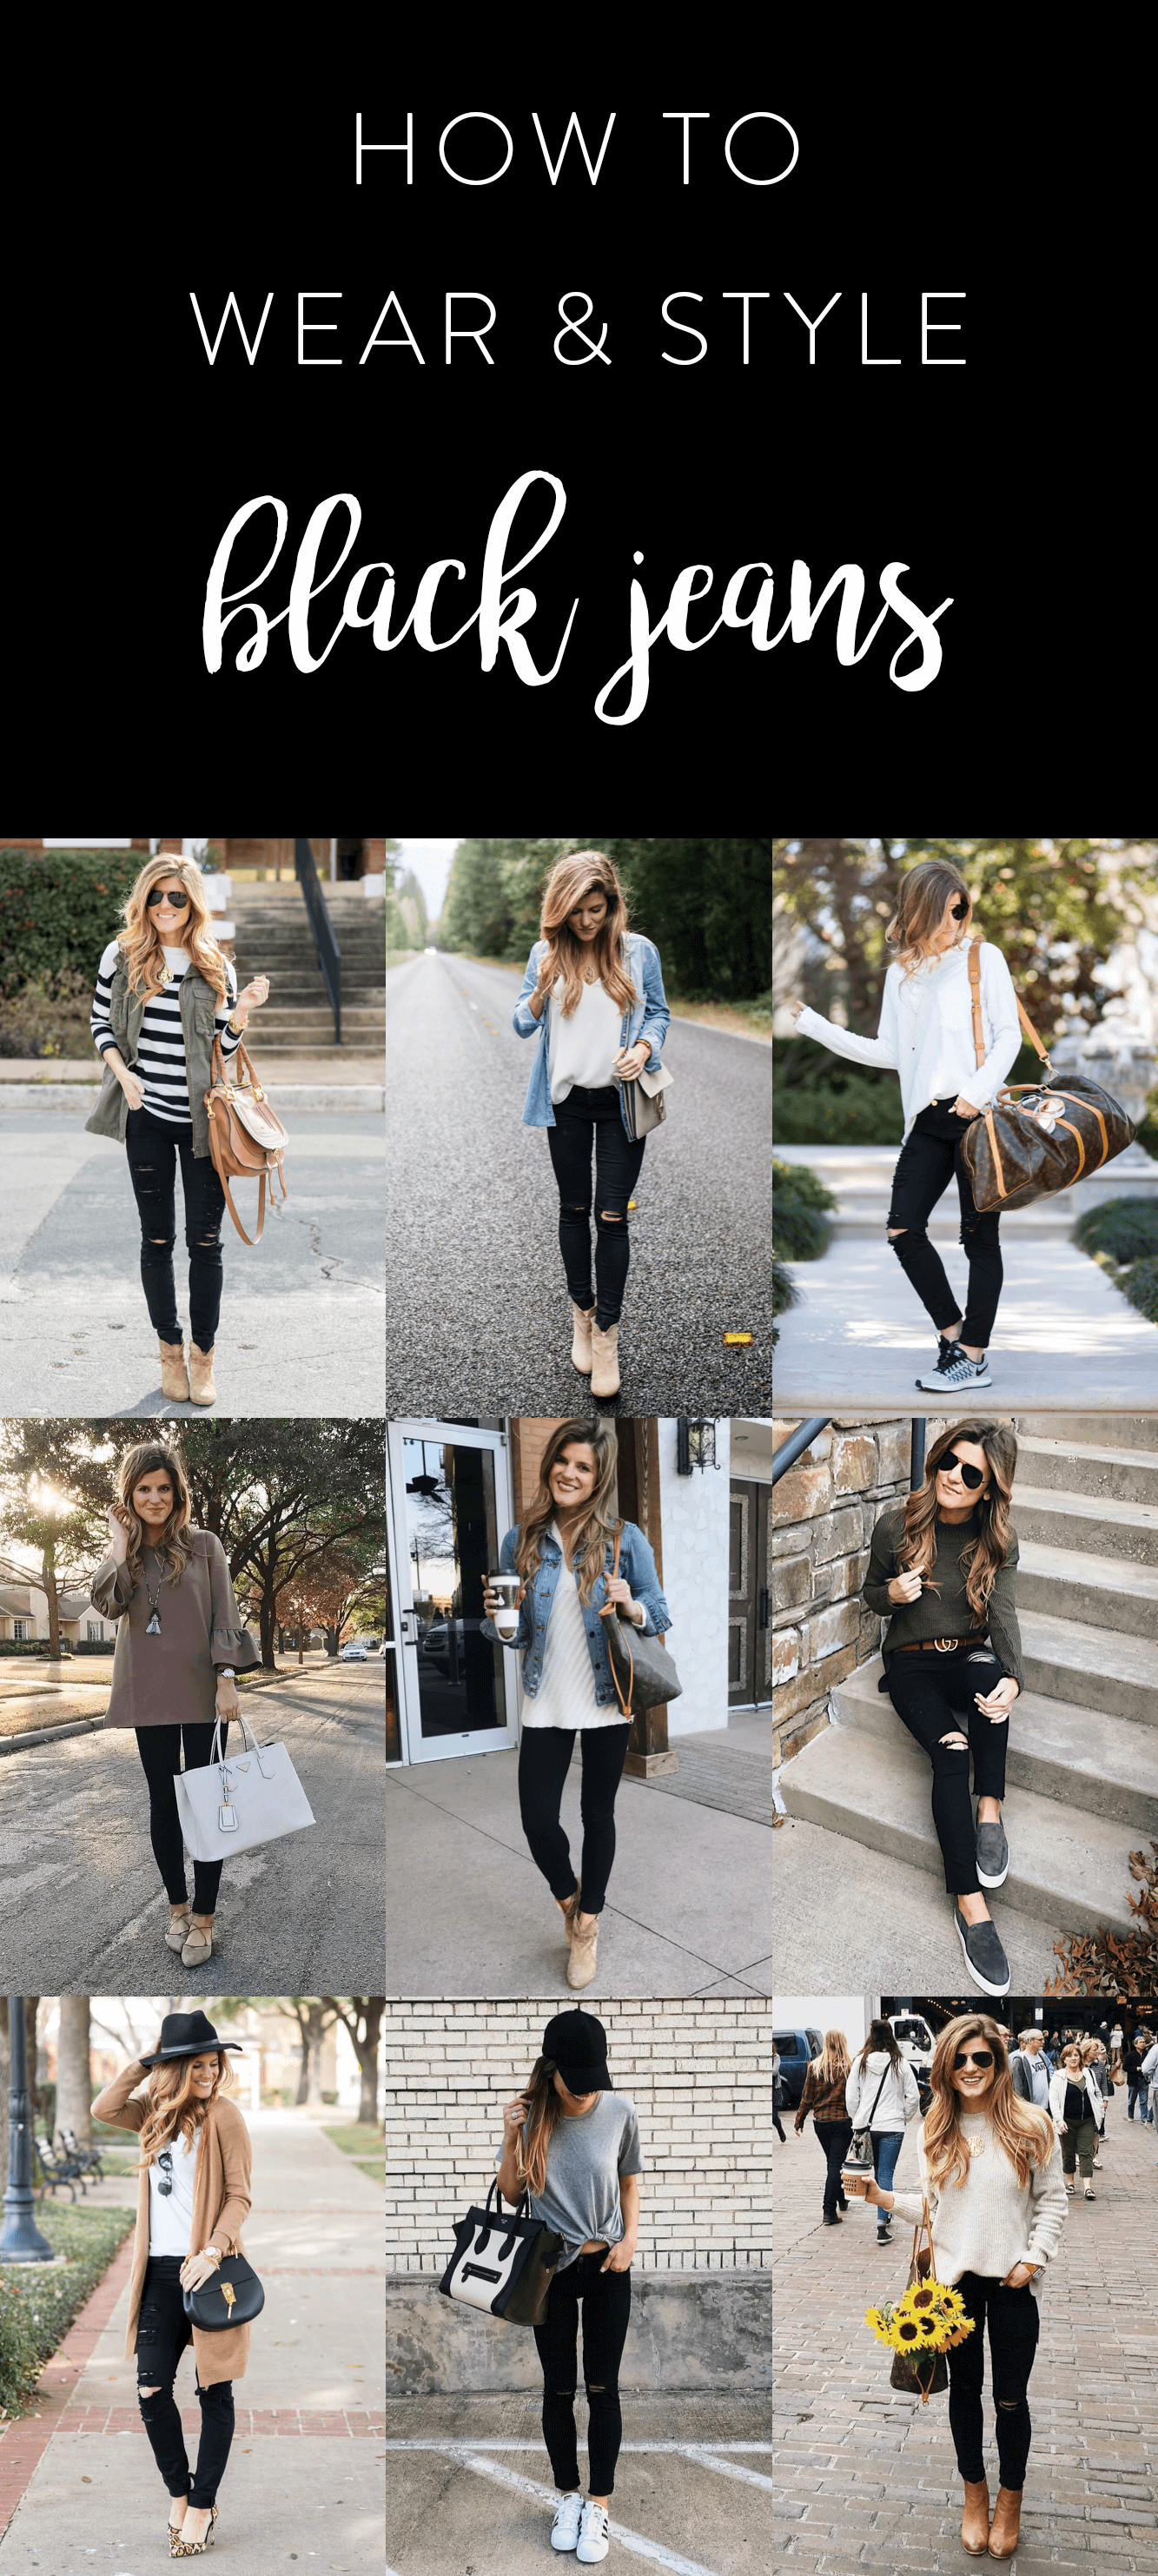 What to wear with black jeans - 30+ Black Jeans Outfit Ideas - What to wear with black jeans - 30+ Black Jeans Outfit Ideas -   14 style Black jeans ideas